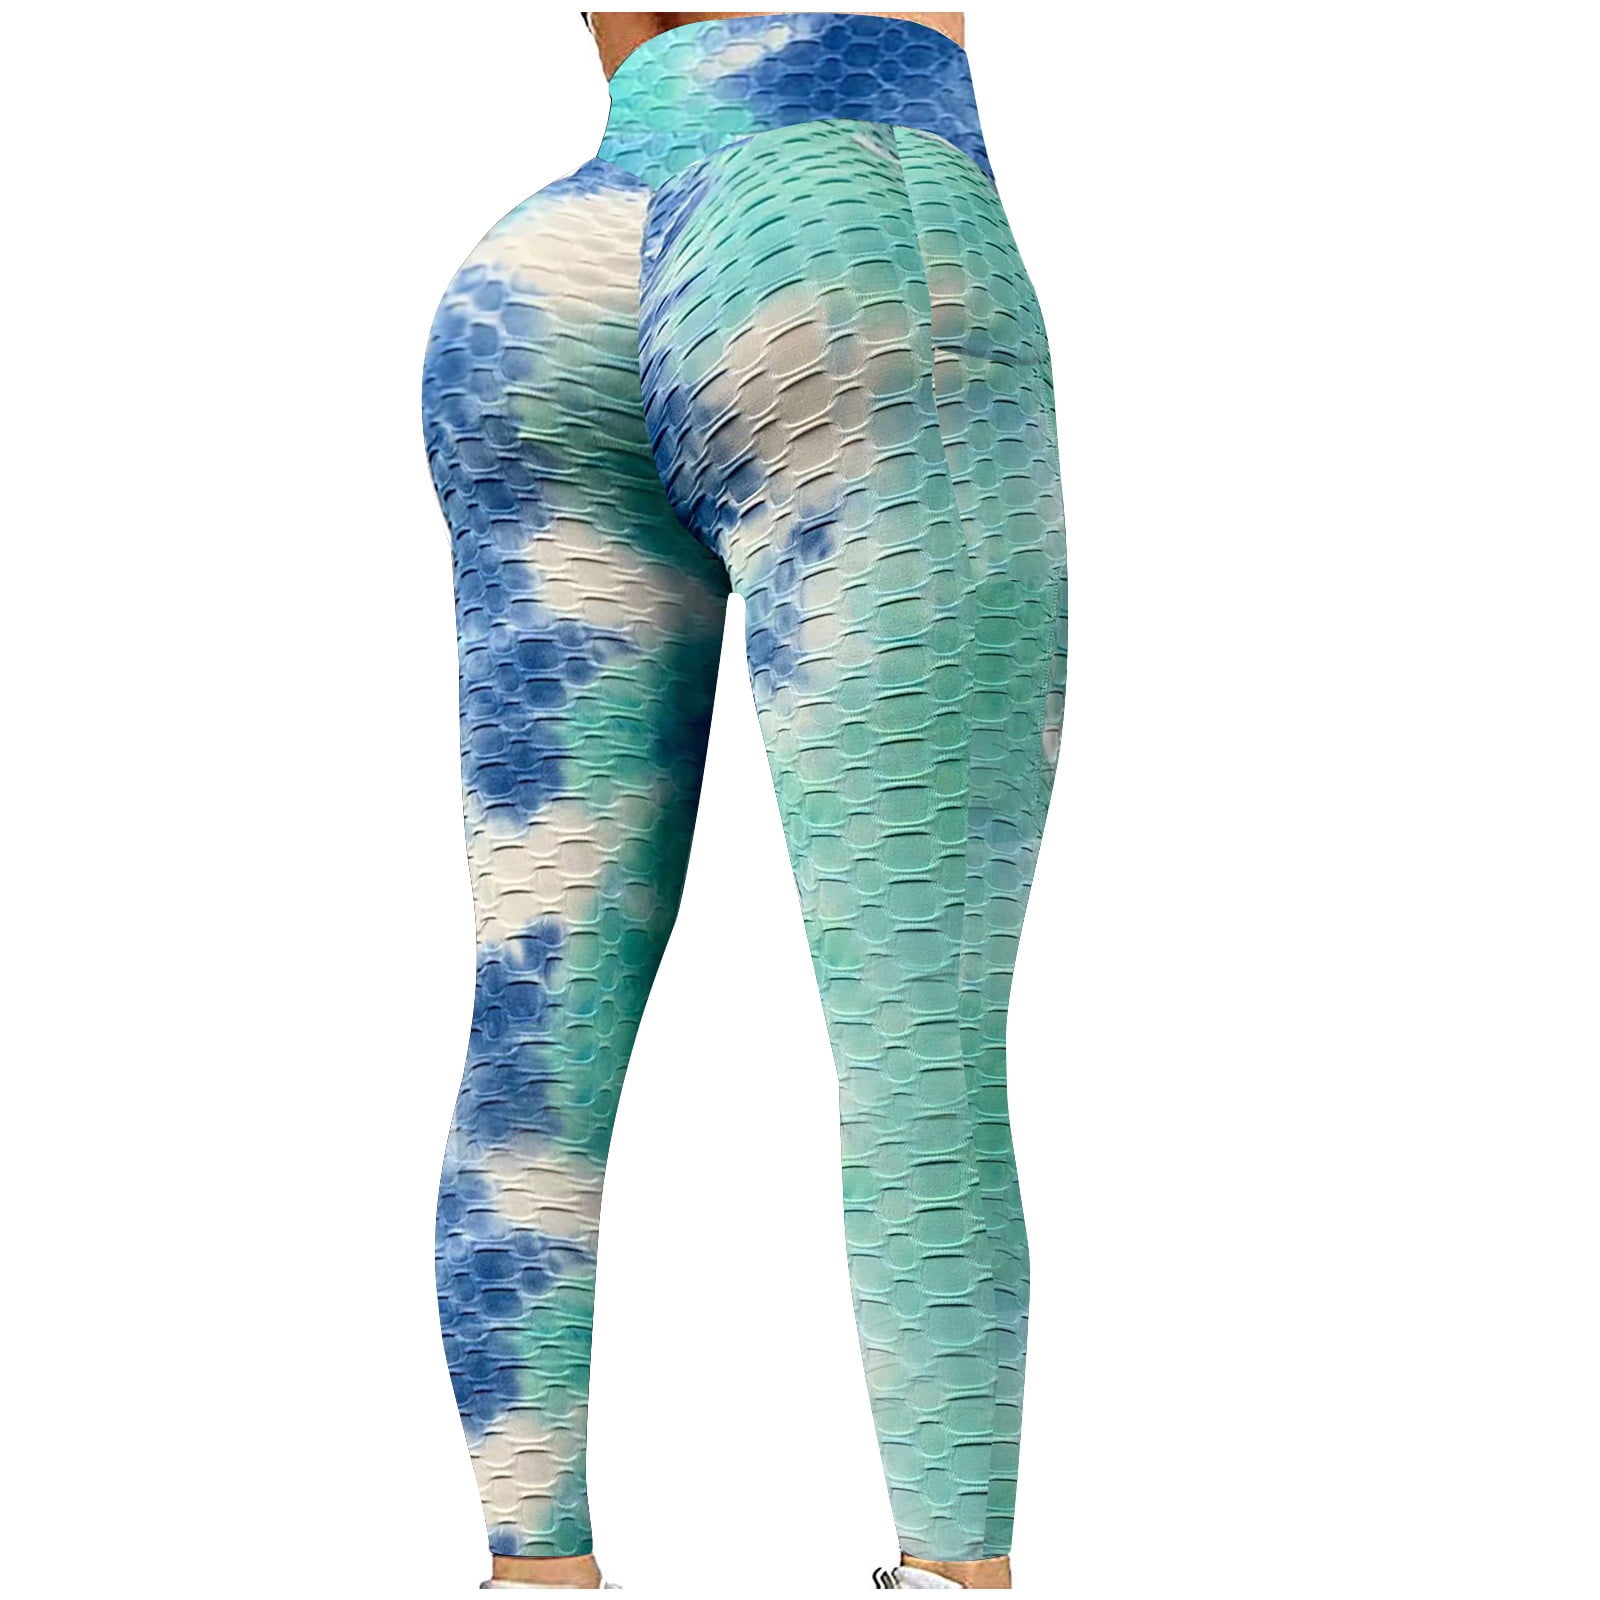 High Waist Faux Leather Yoga Leggings With Push Up Effect Energy